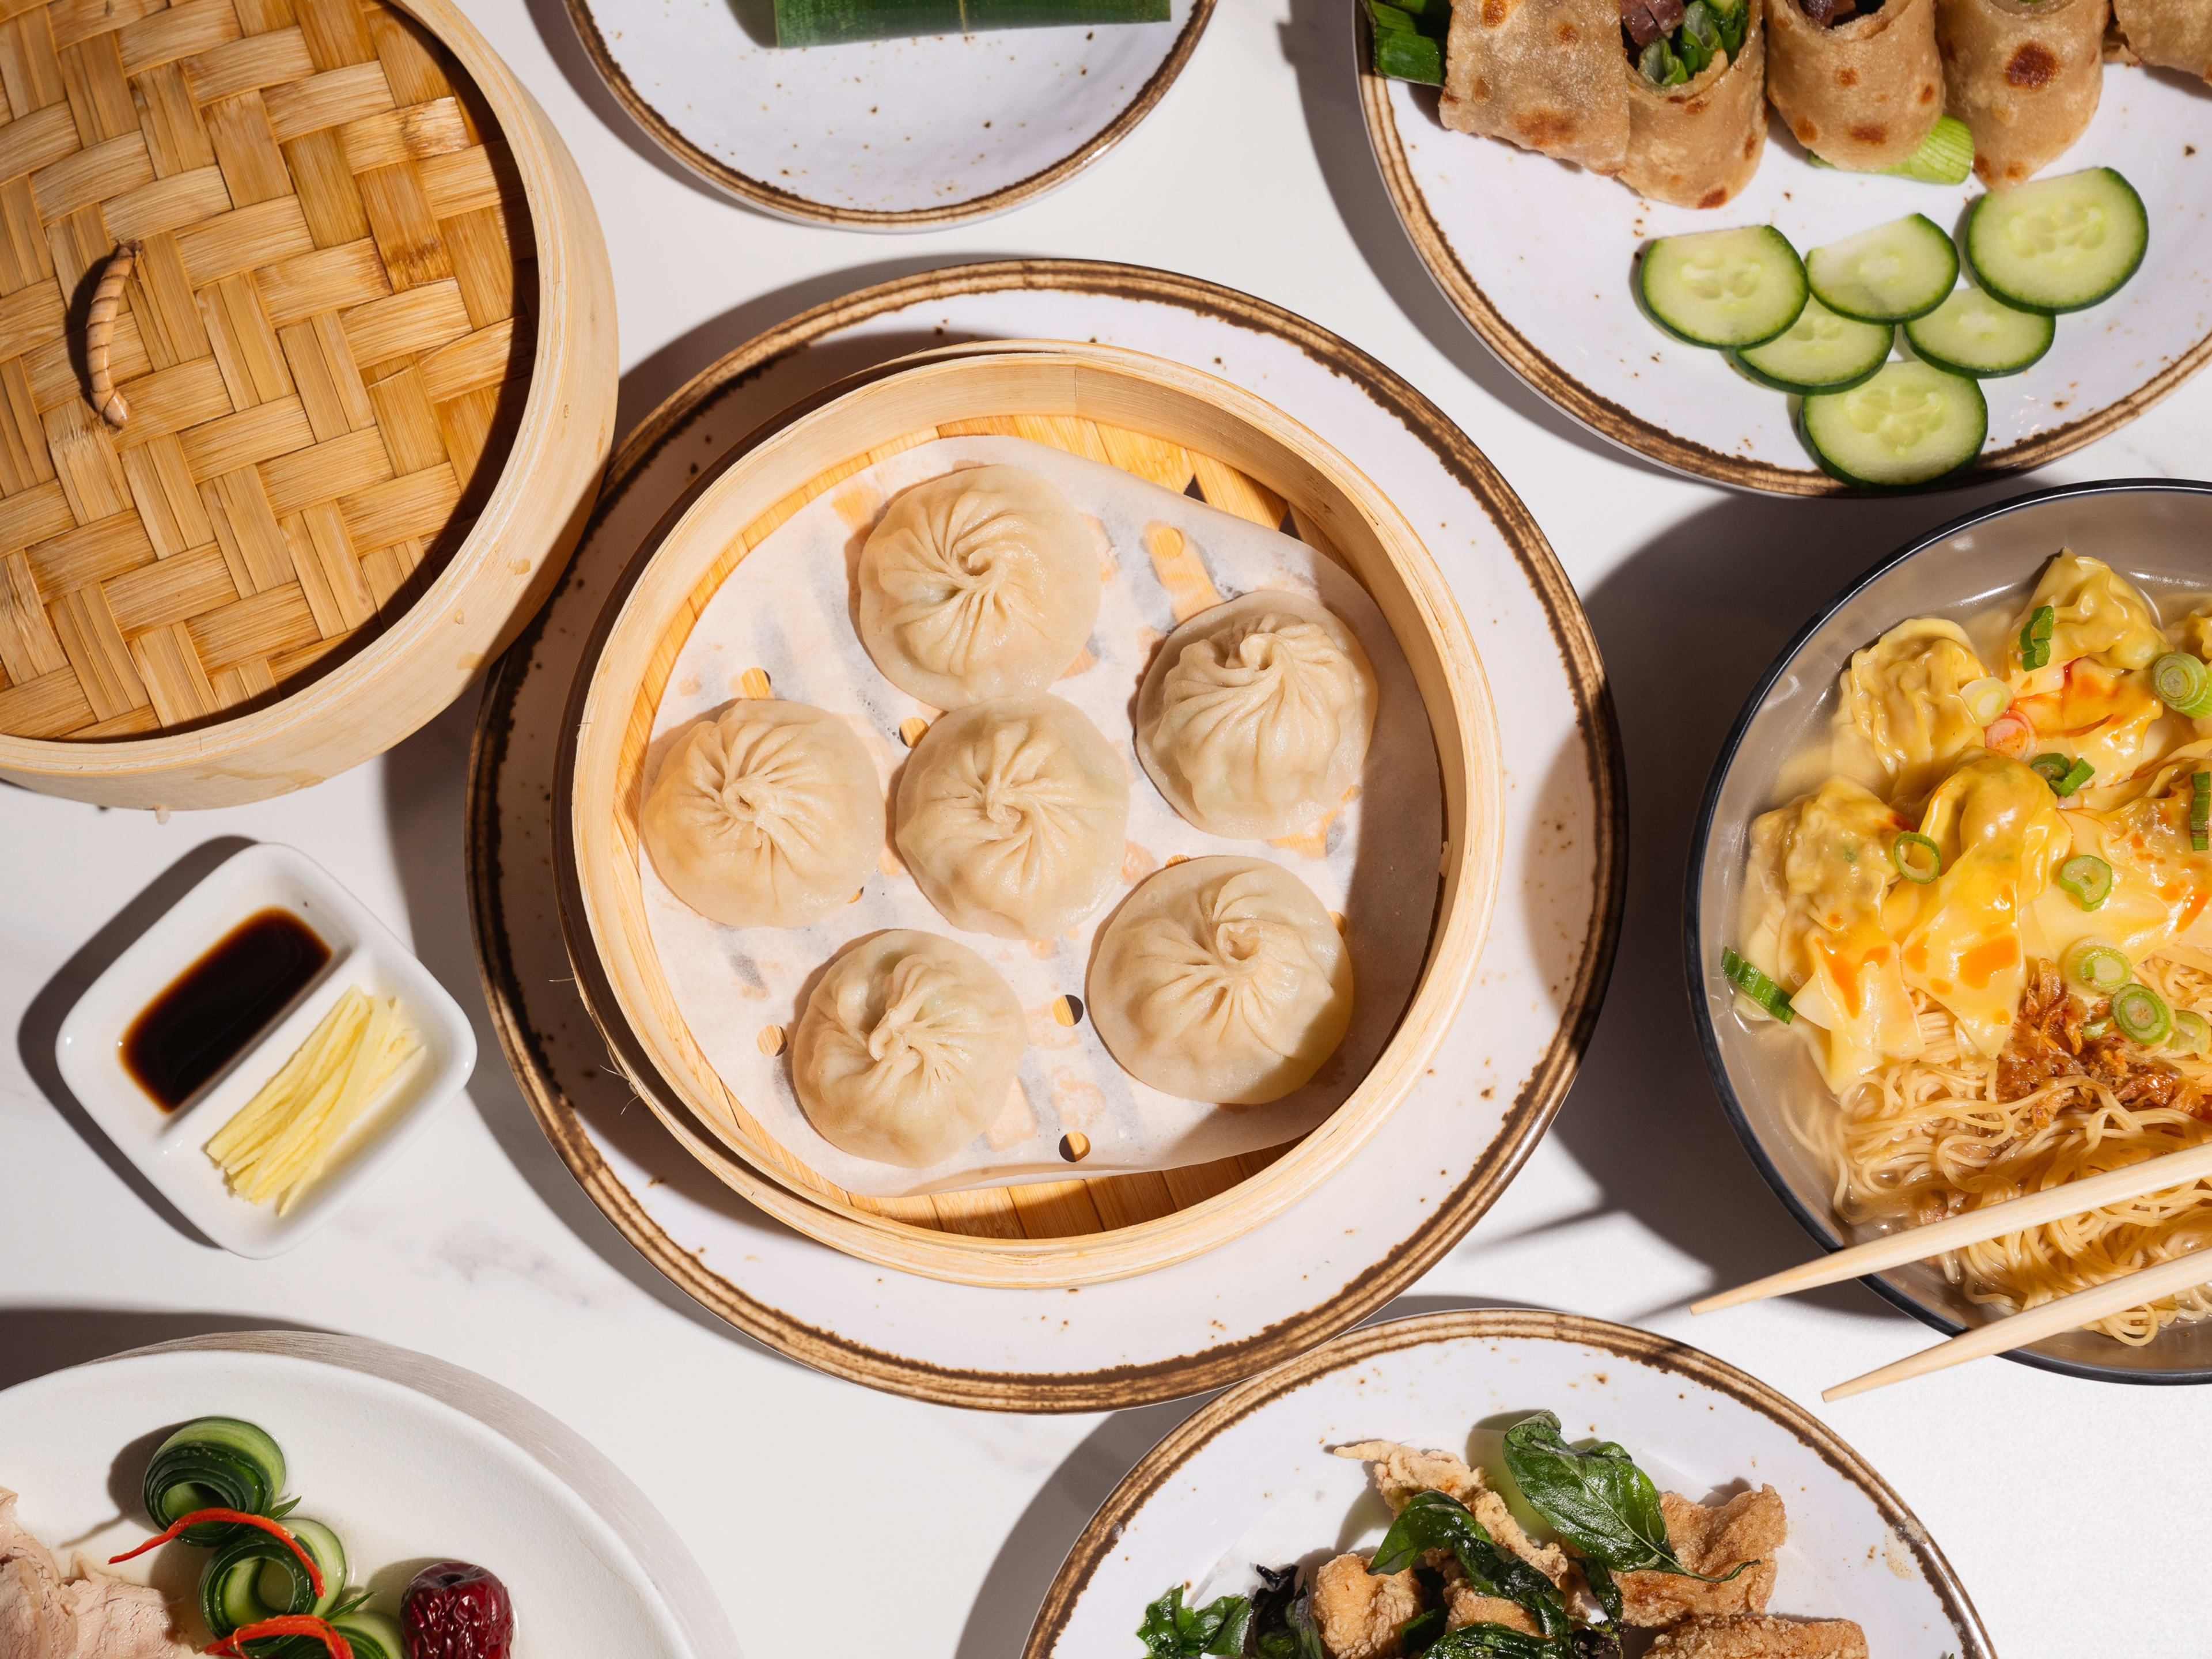 A spread of dishes with plates full of soup dumplings and noodles.